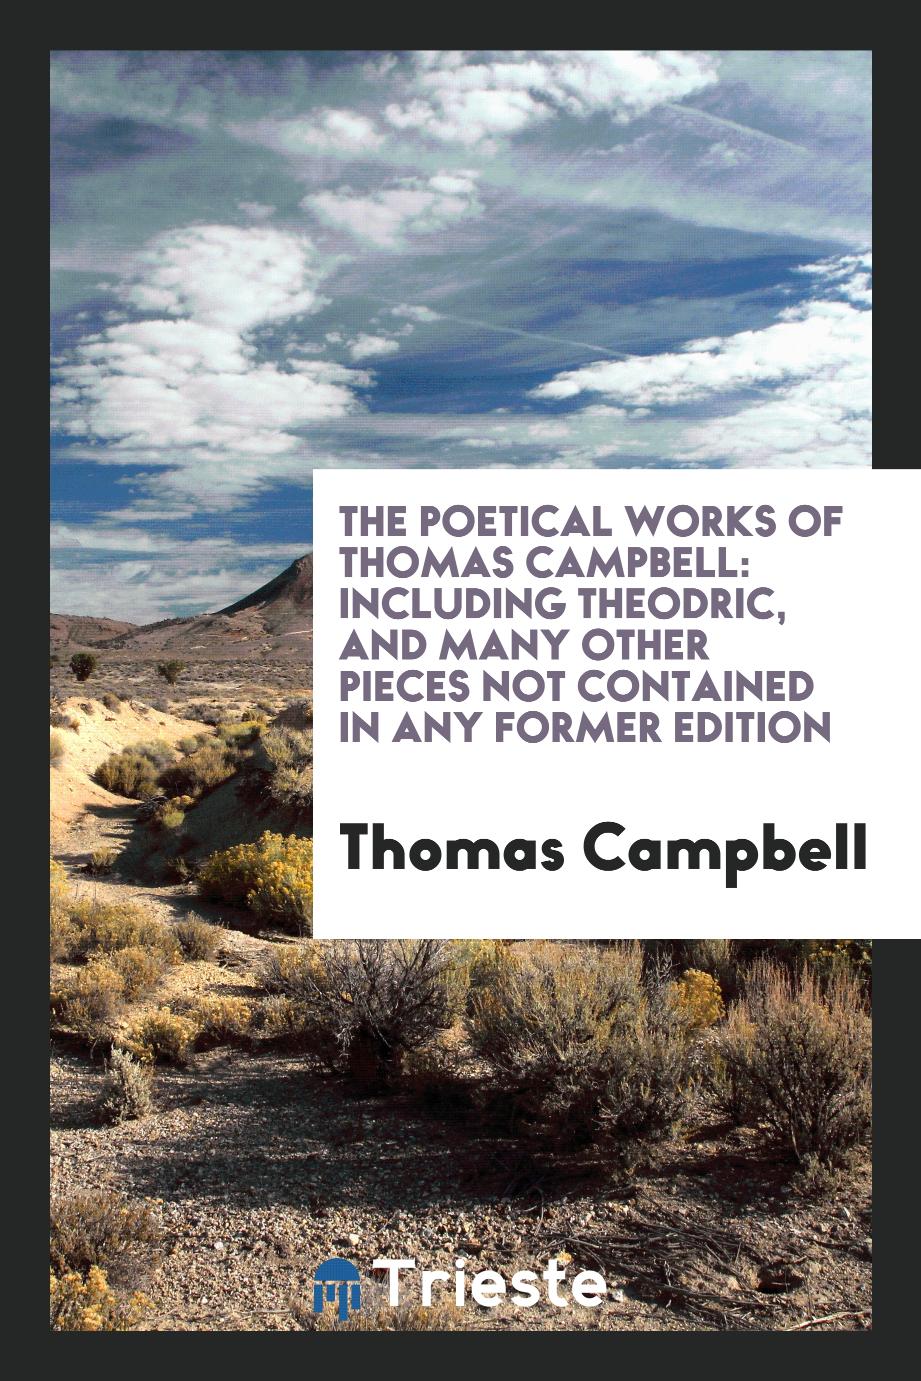 The poetical works of Thomas Campbell: including Theodric, and many other pieces not contained in any former edition